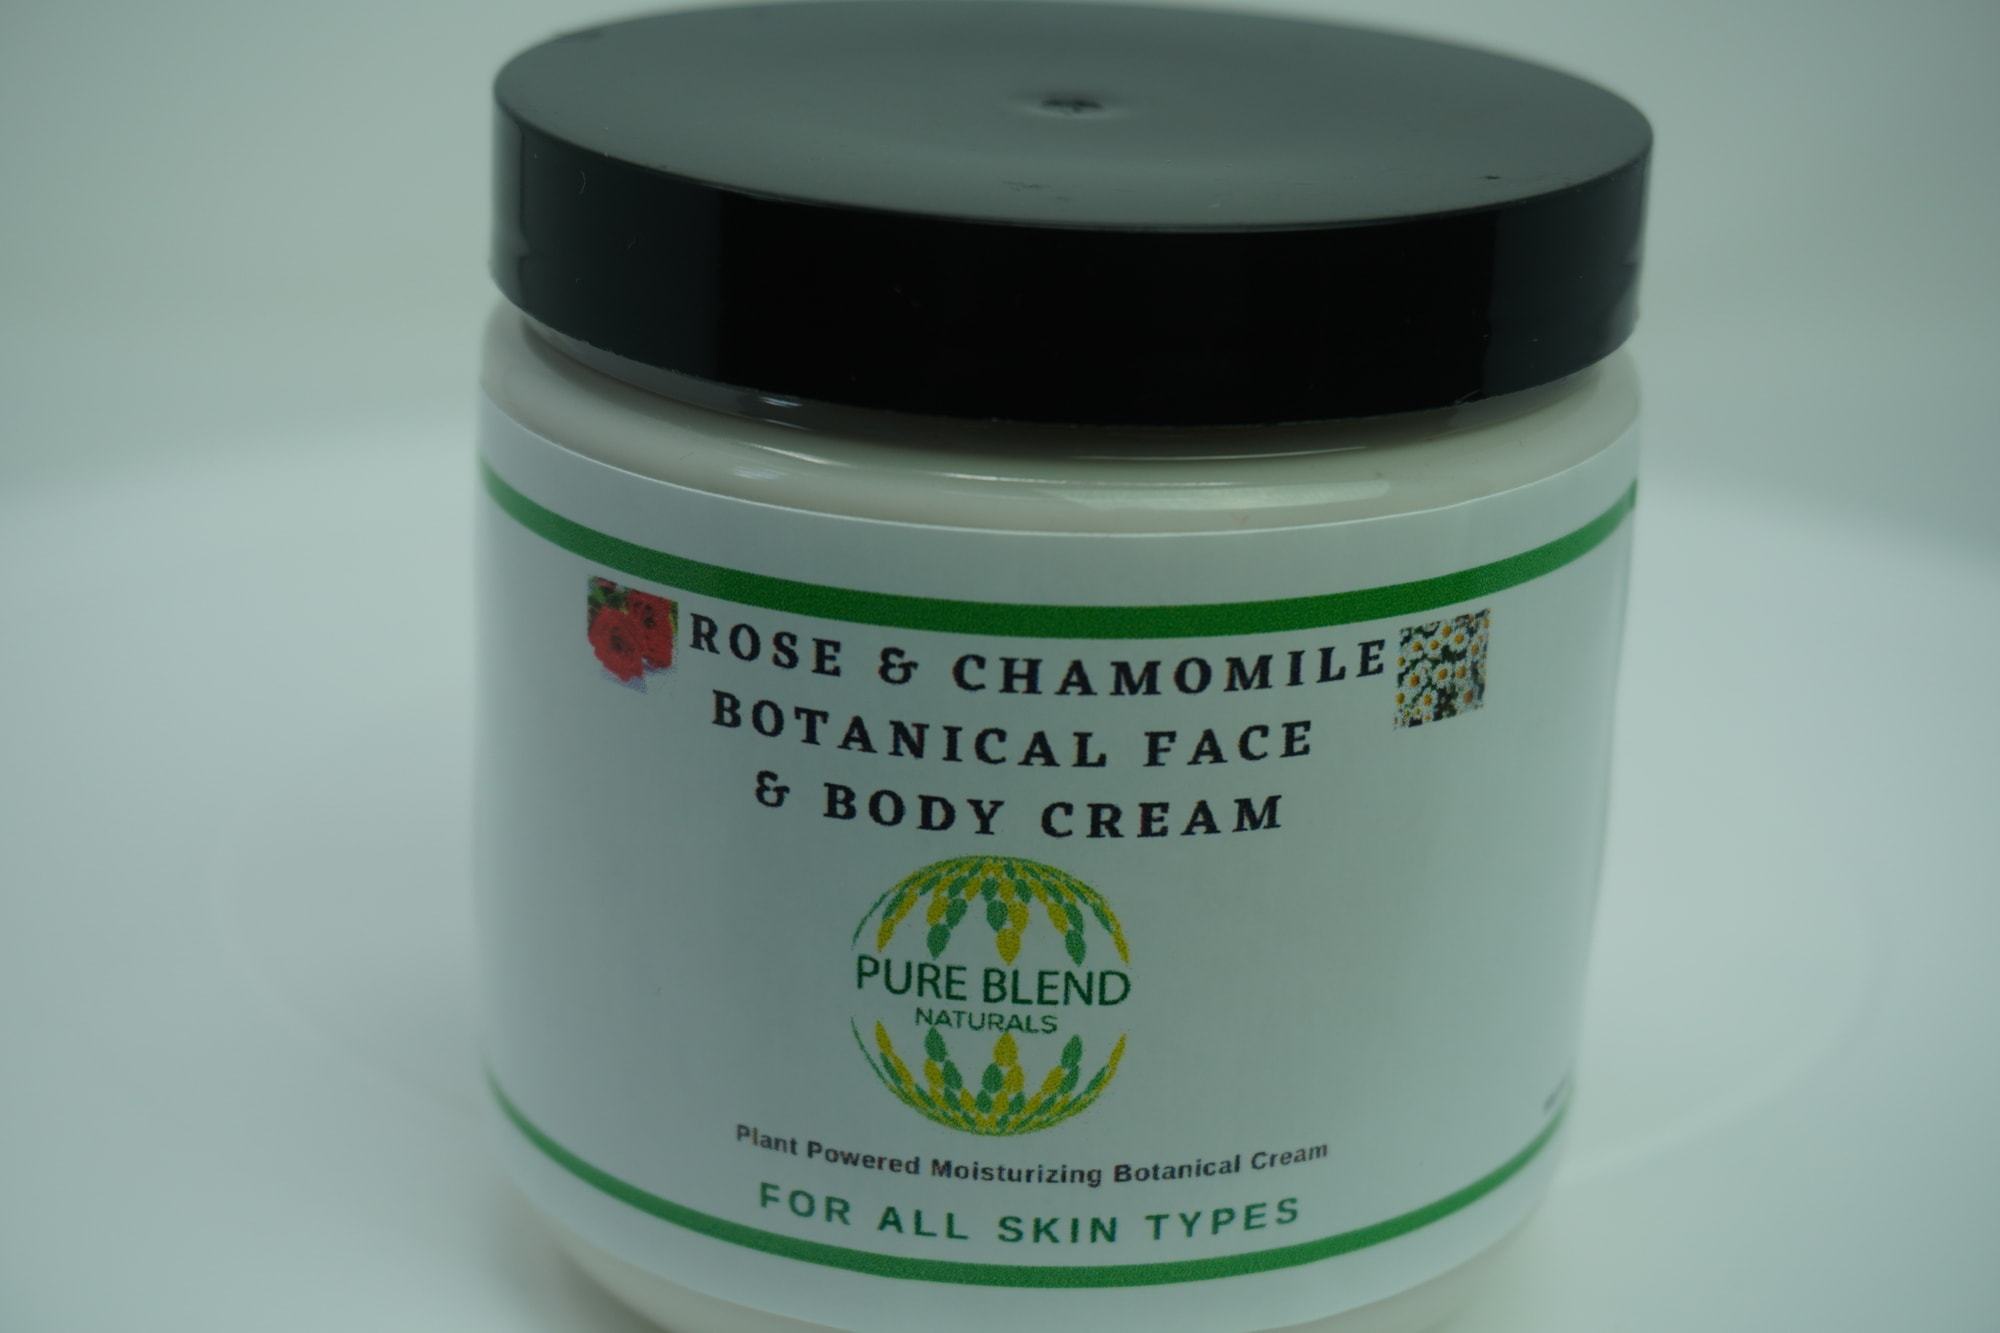 Pure Blend Naturals Rose And Chamomile Face & Body Cream